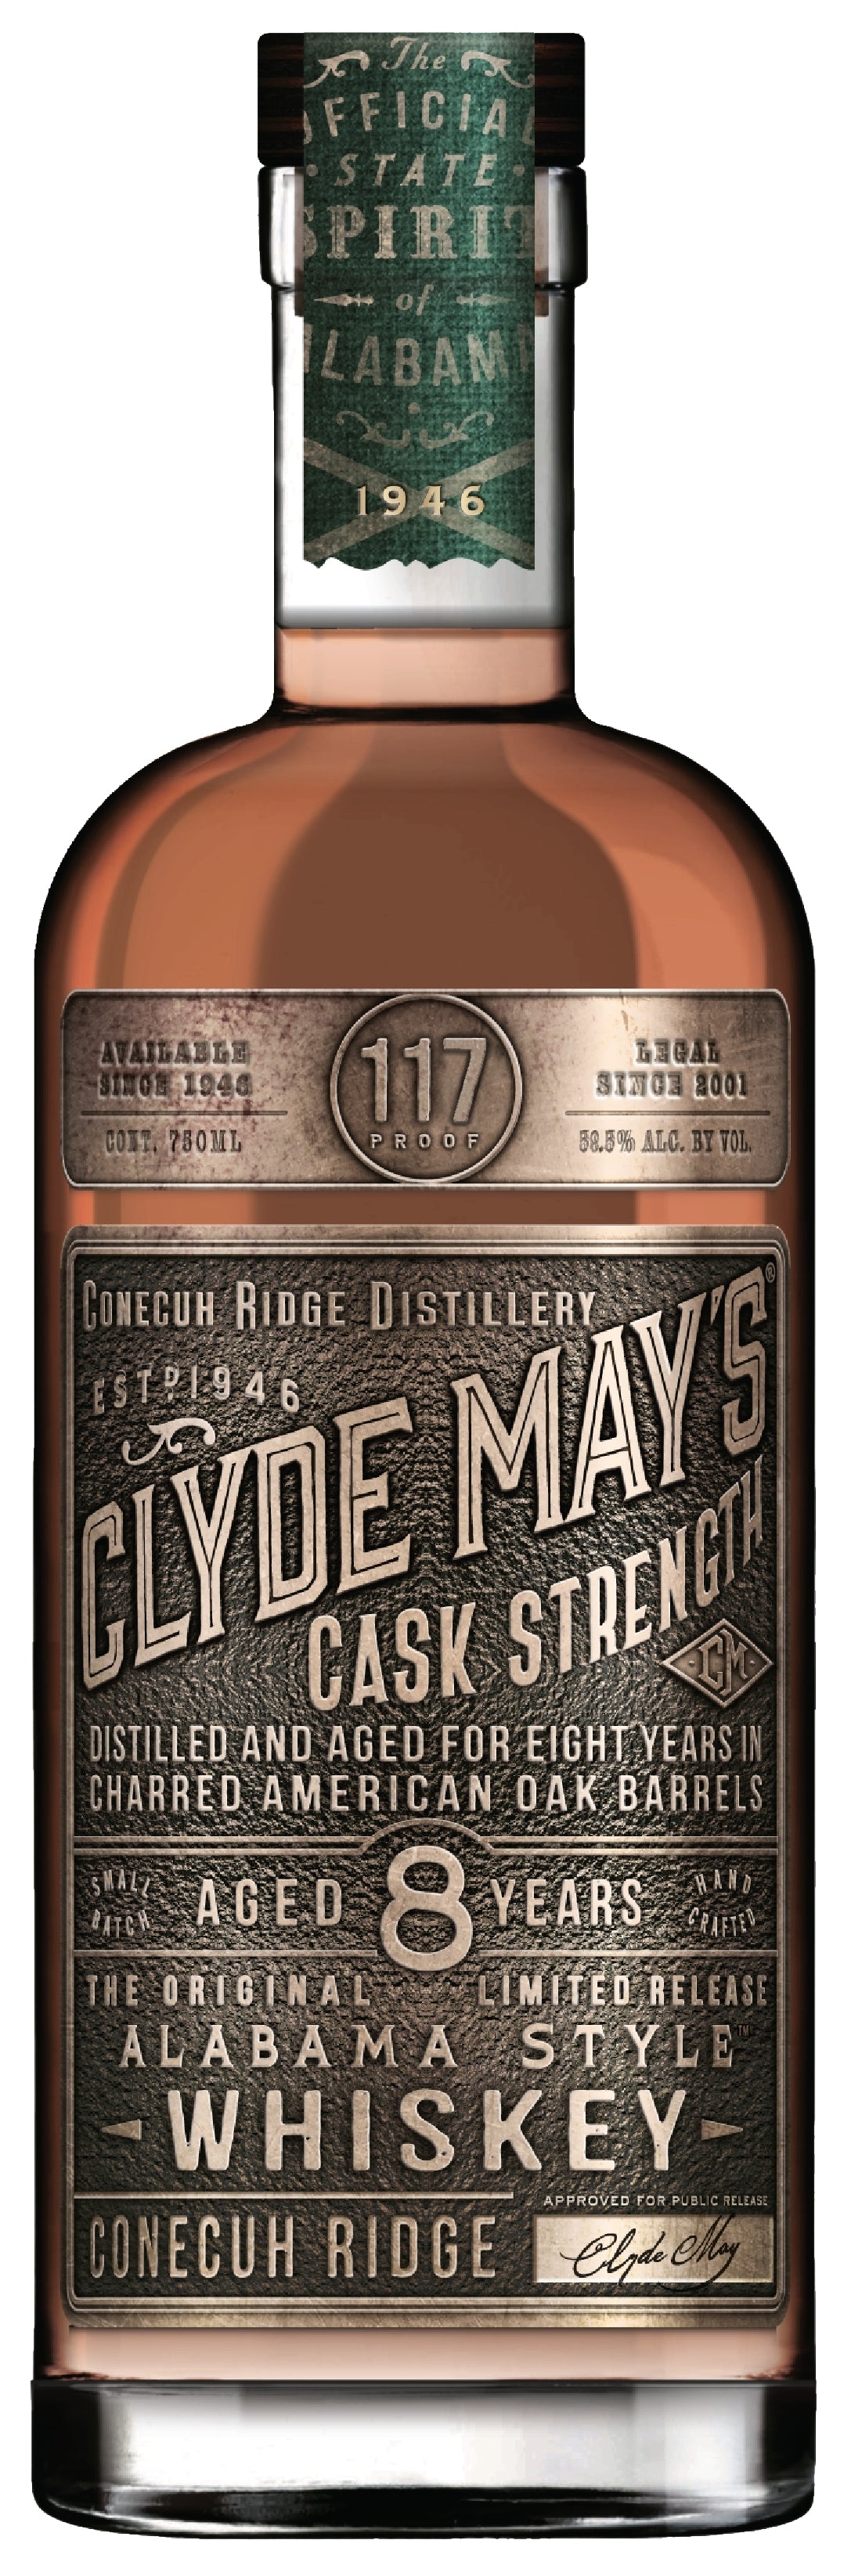 Clyde May's Whiskey 9 Year Cask Strength